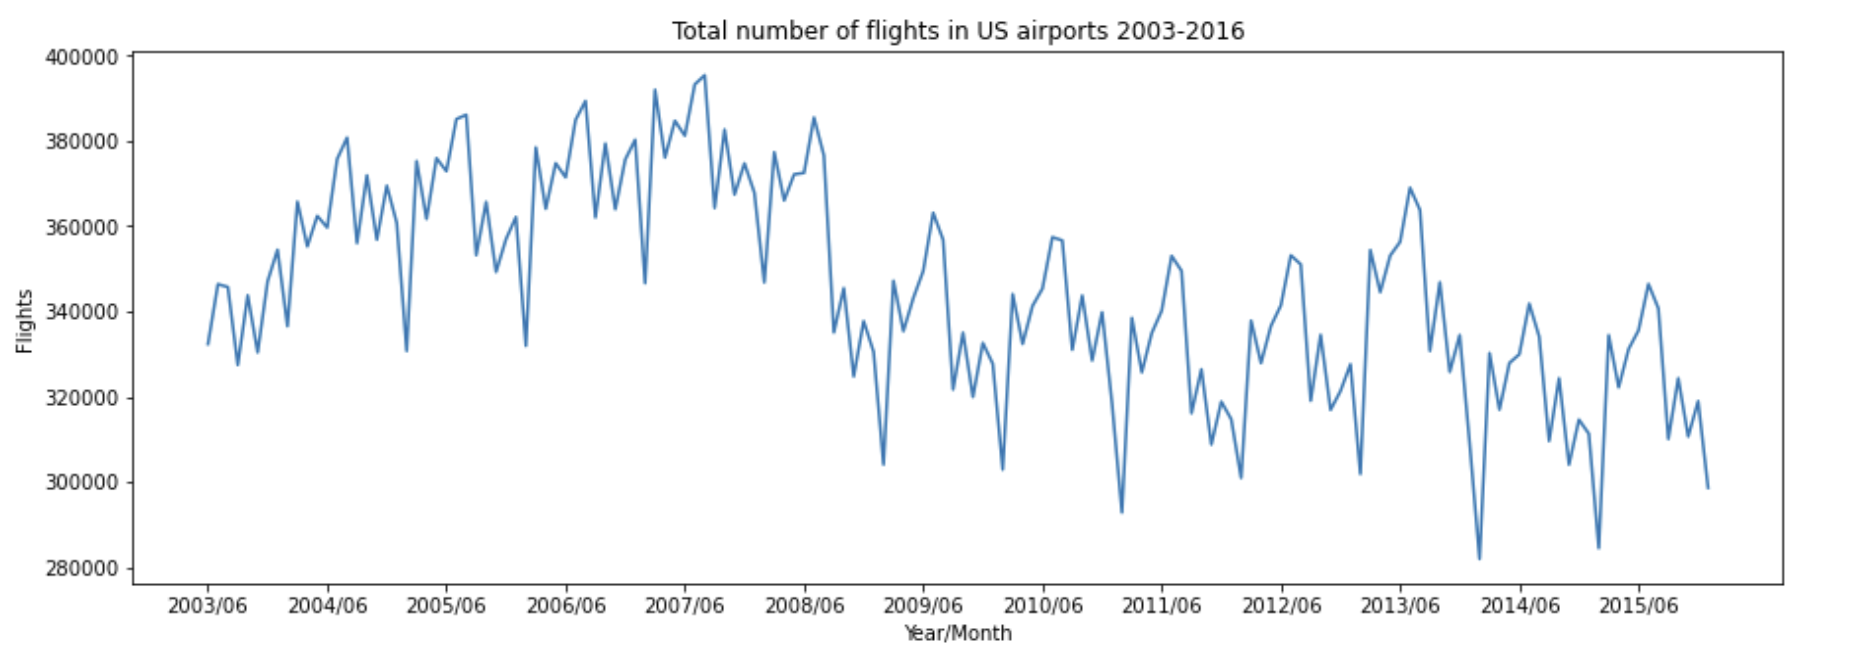 Total number of flights in US airports 2003-2016